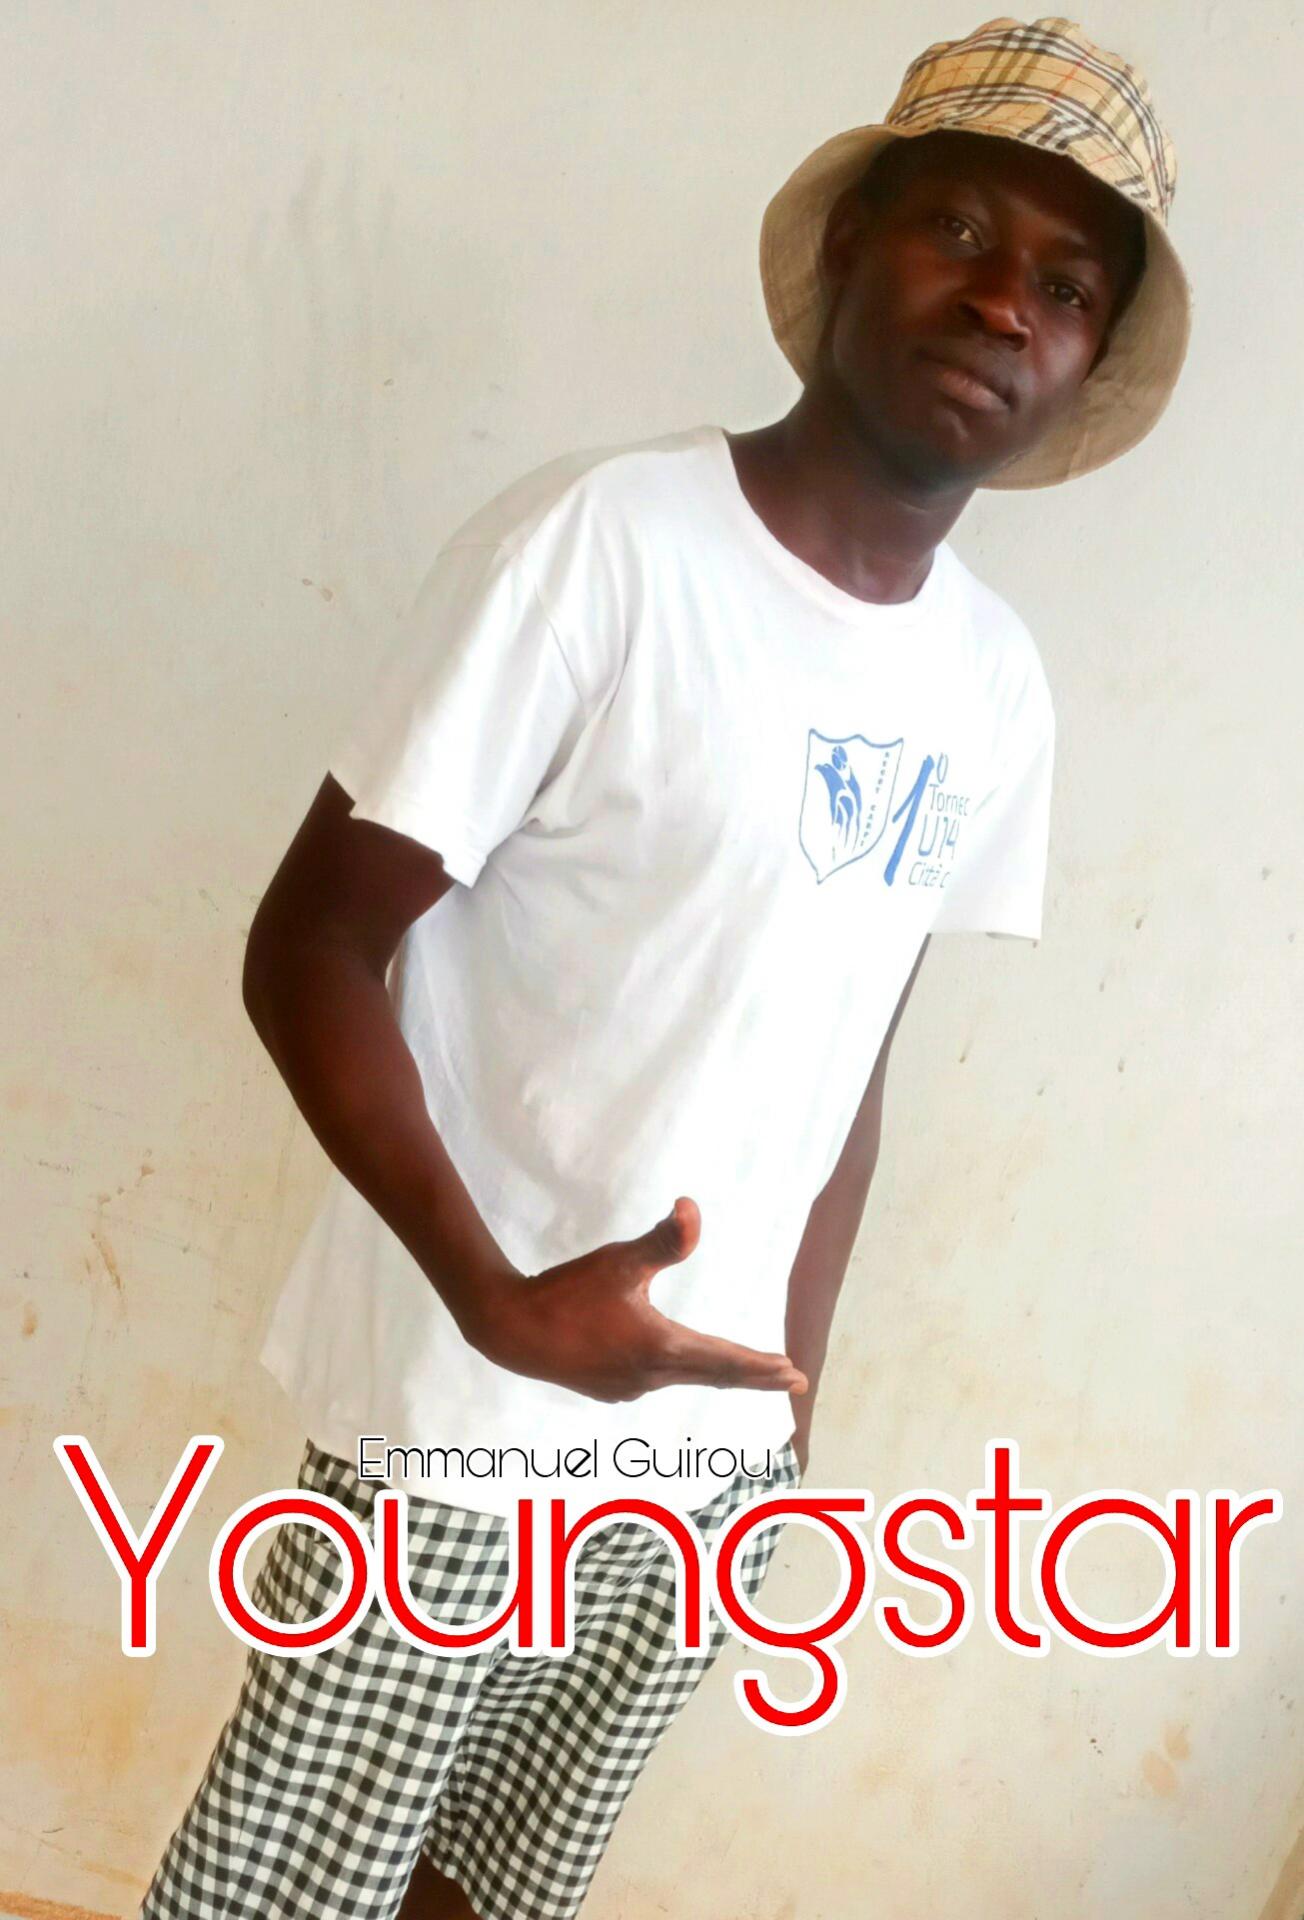 Youngstar